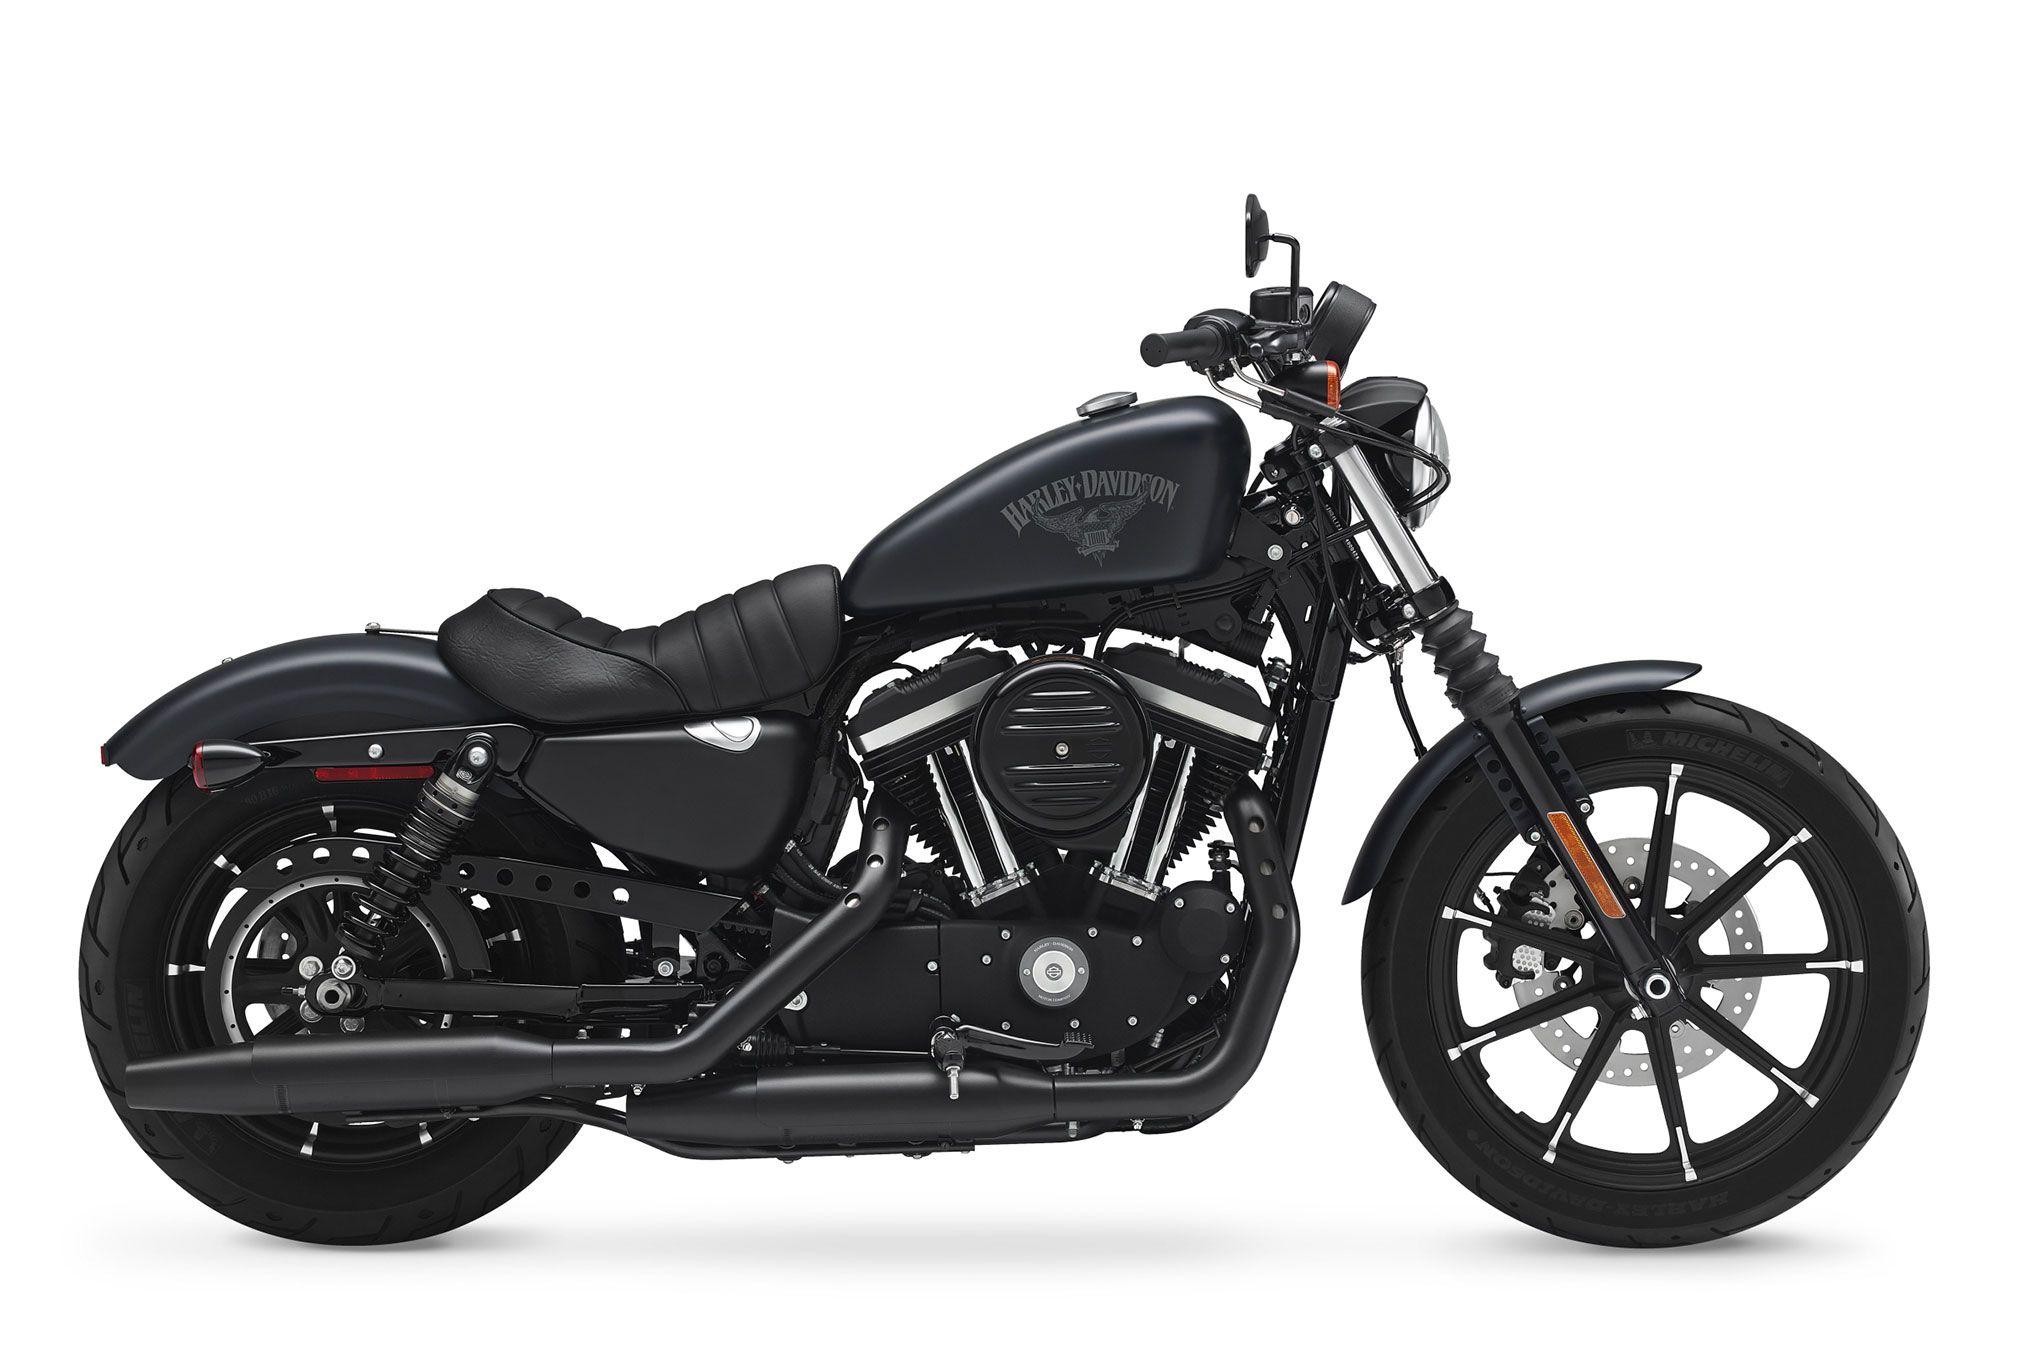 Harley Davidson Iron 883 Full HD Wallpaper And Background